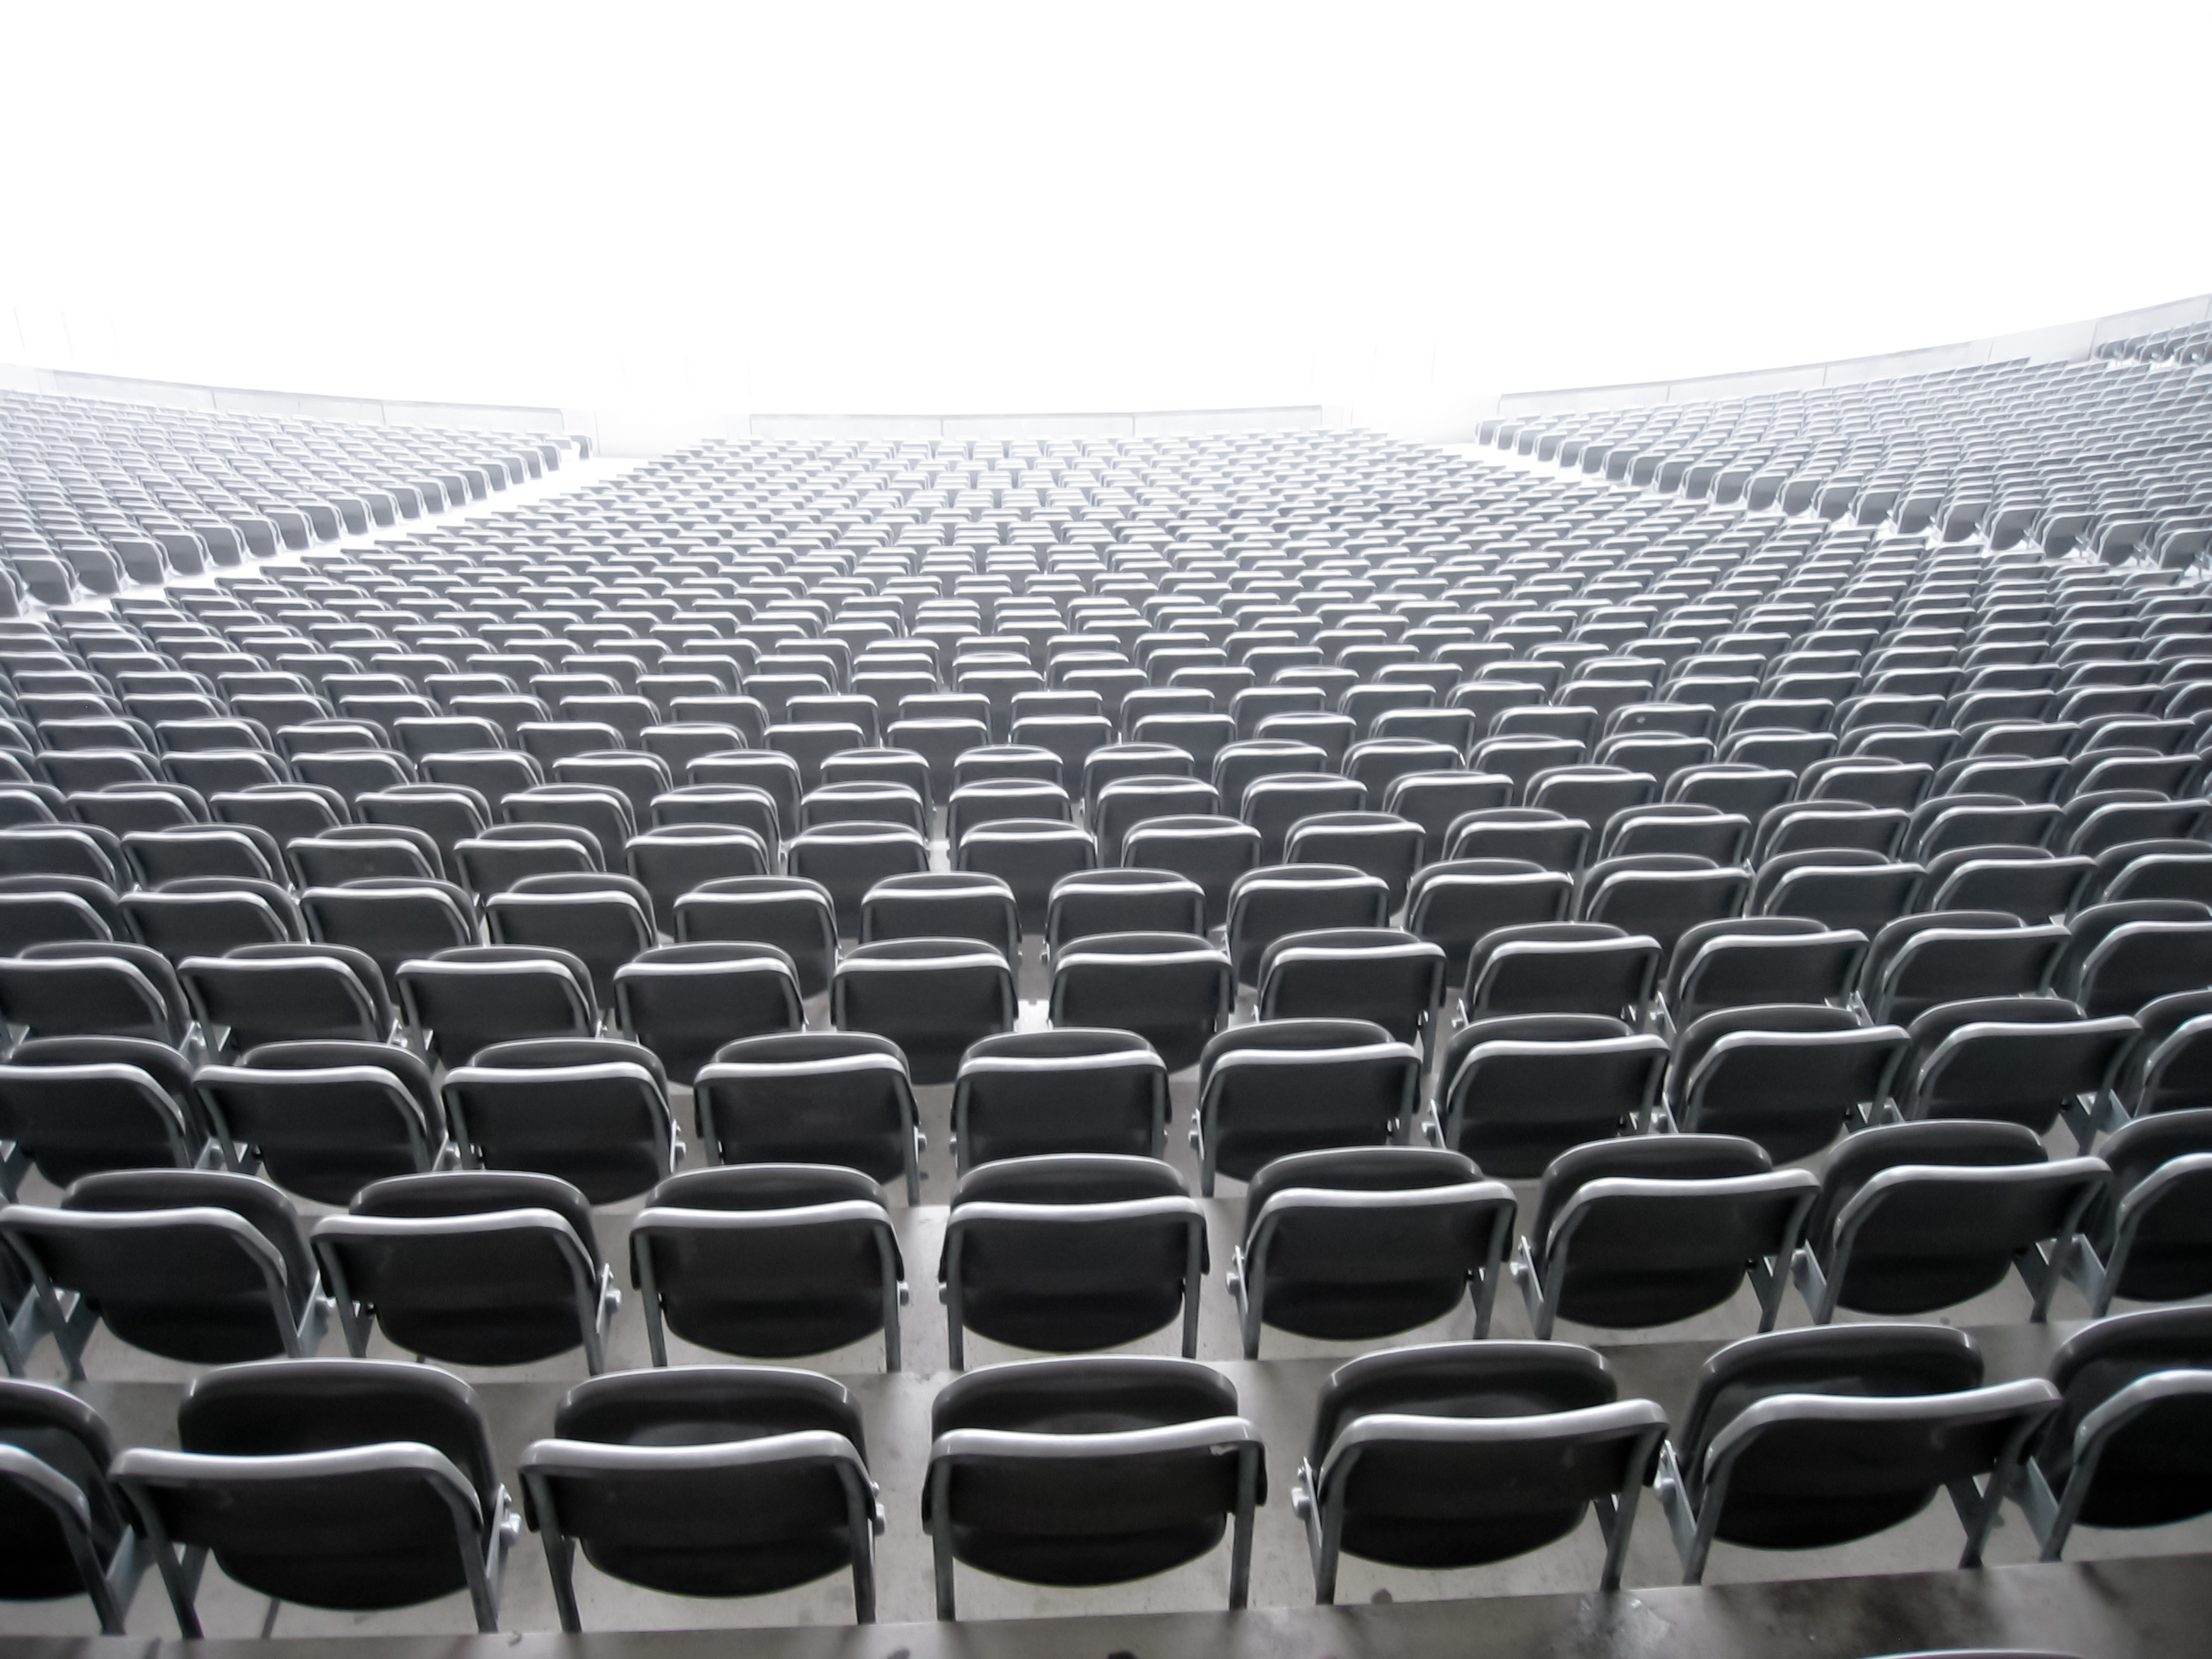 Stadium seating empty before the main event